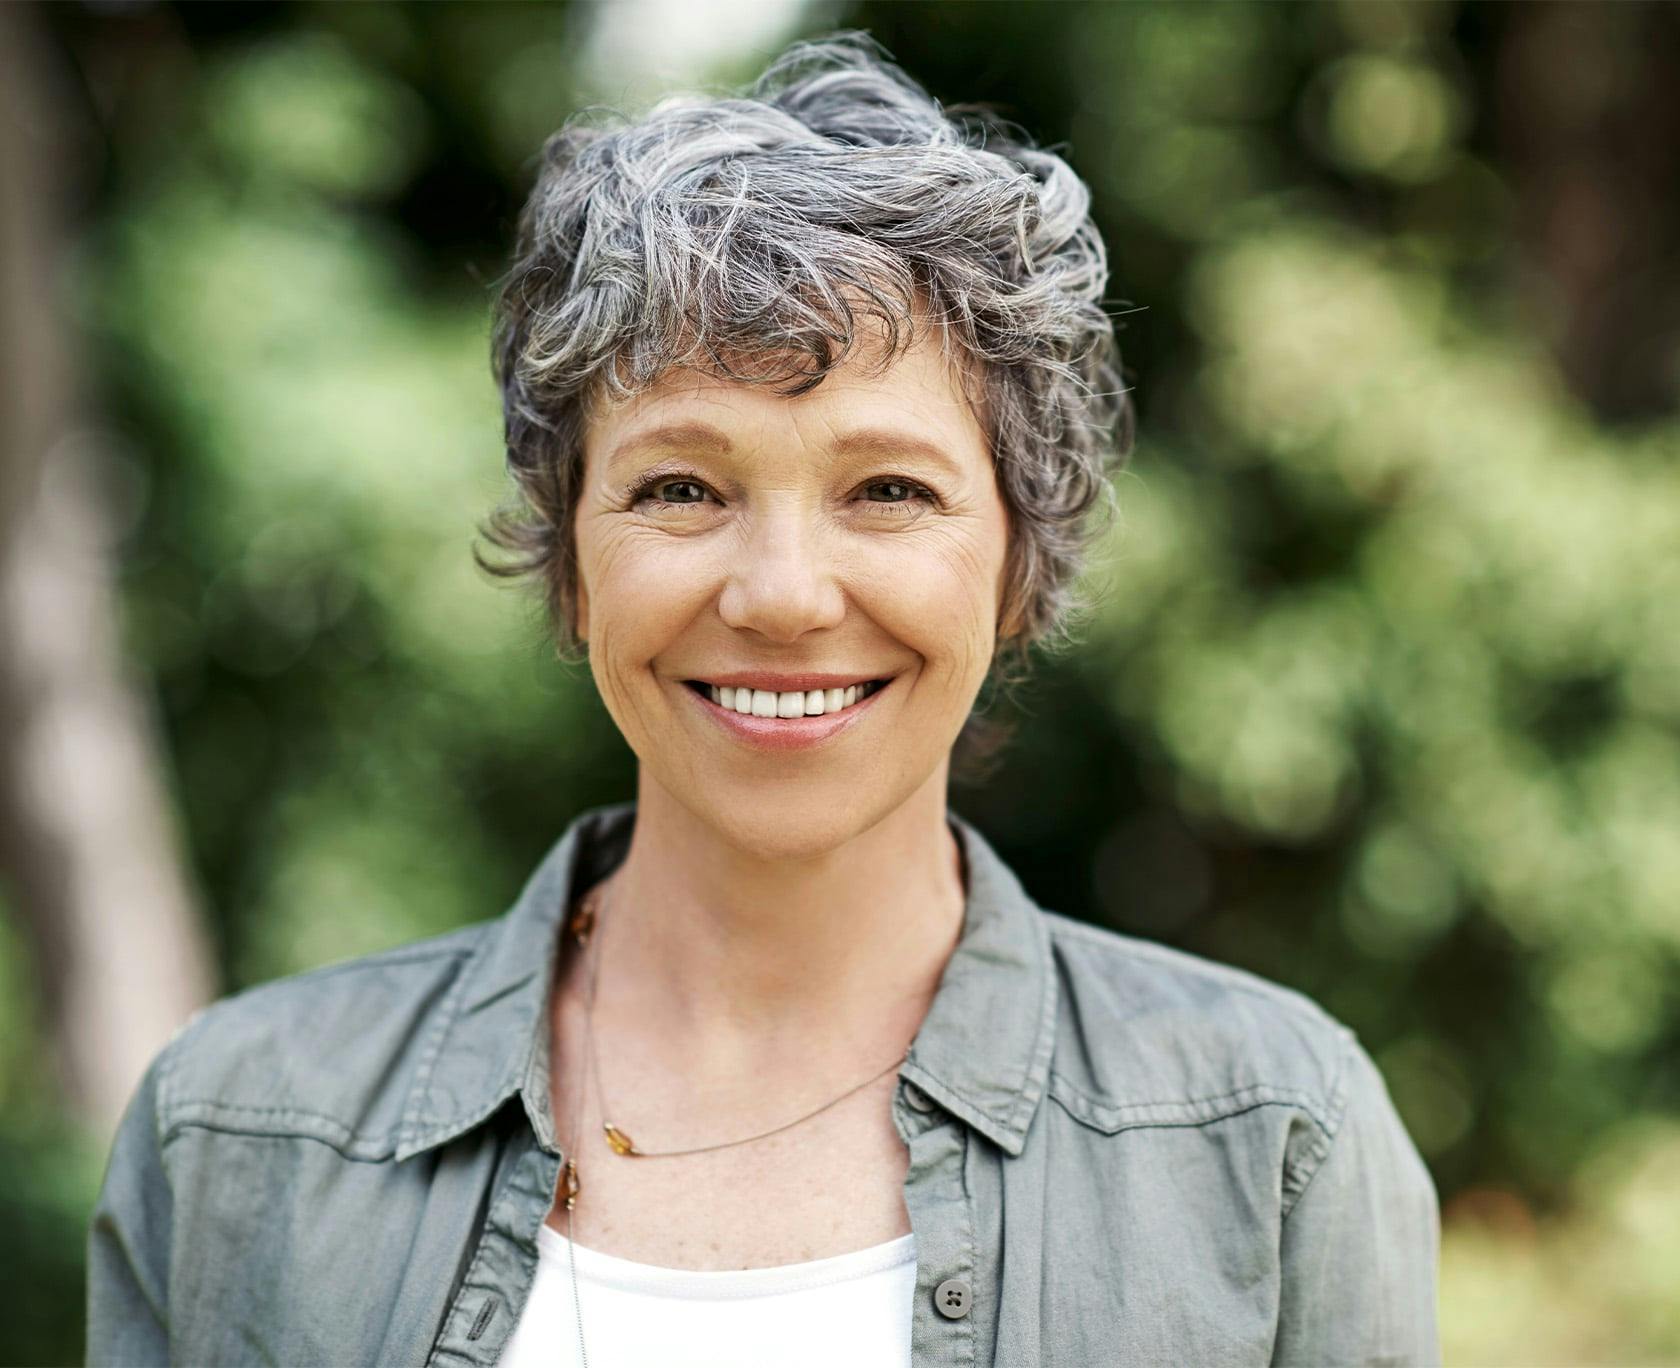 Woman in a sage green shirt smiling